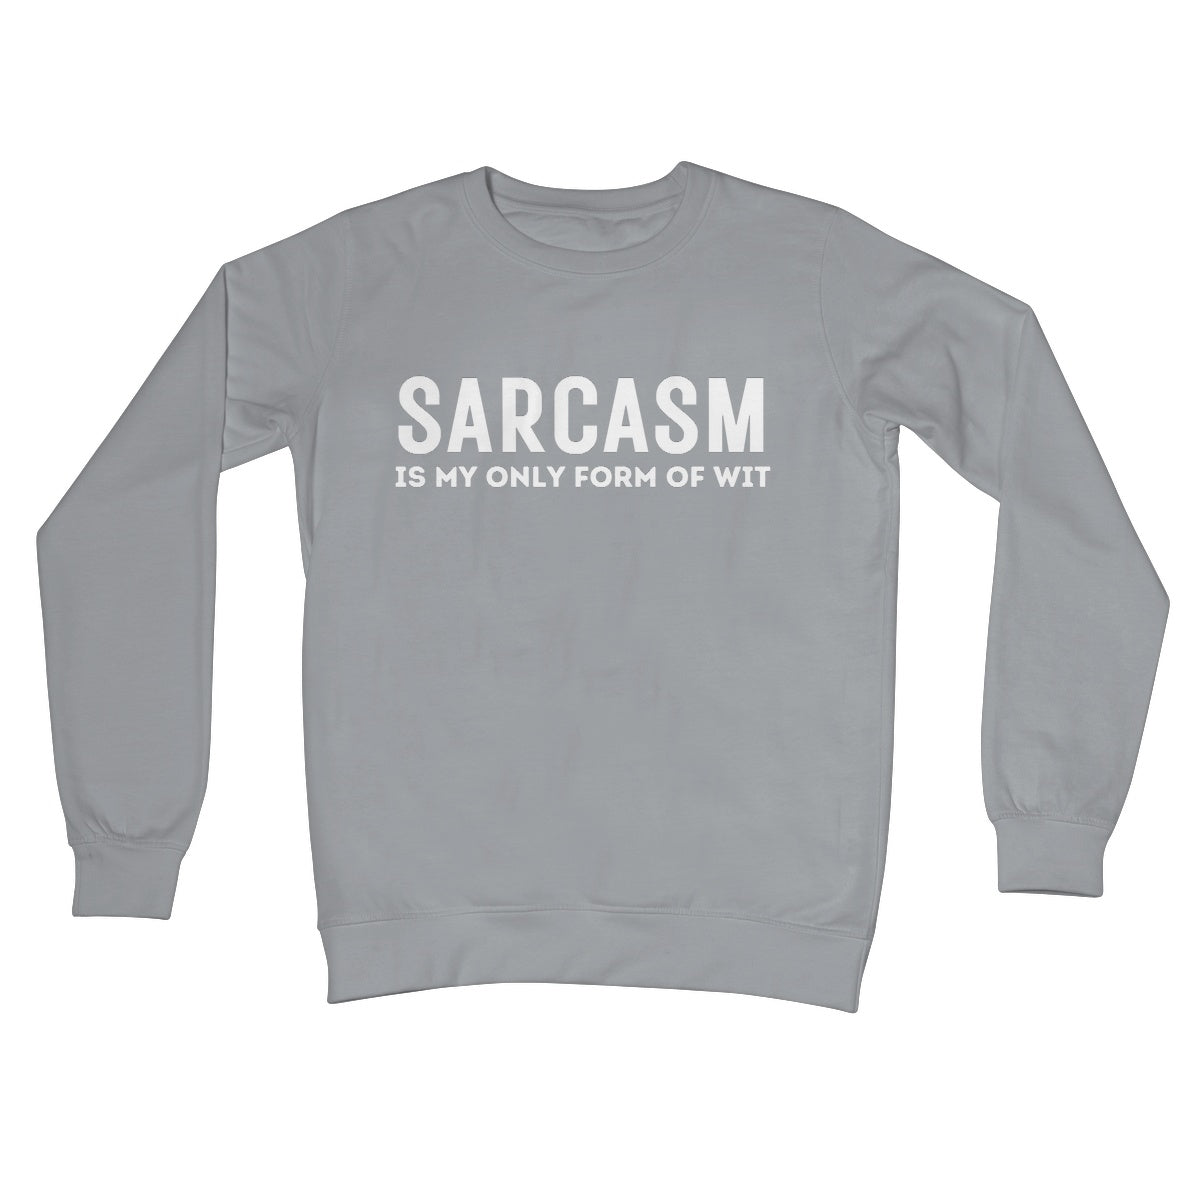 sarcasm is my only form of wit jumper grey